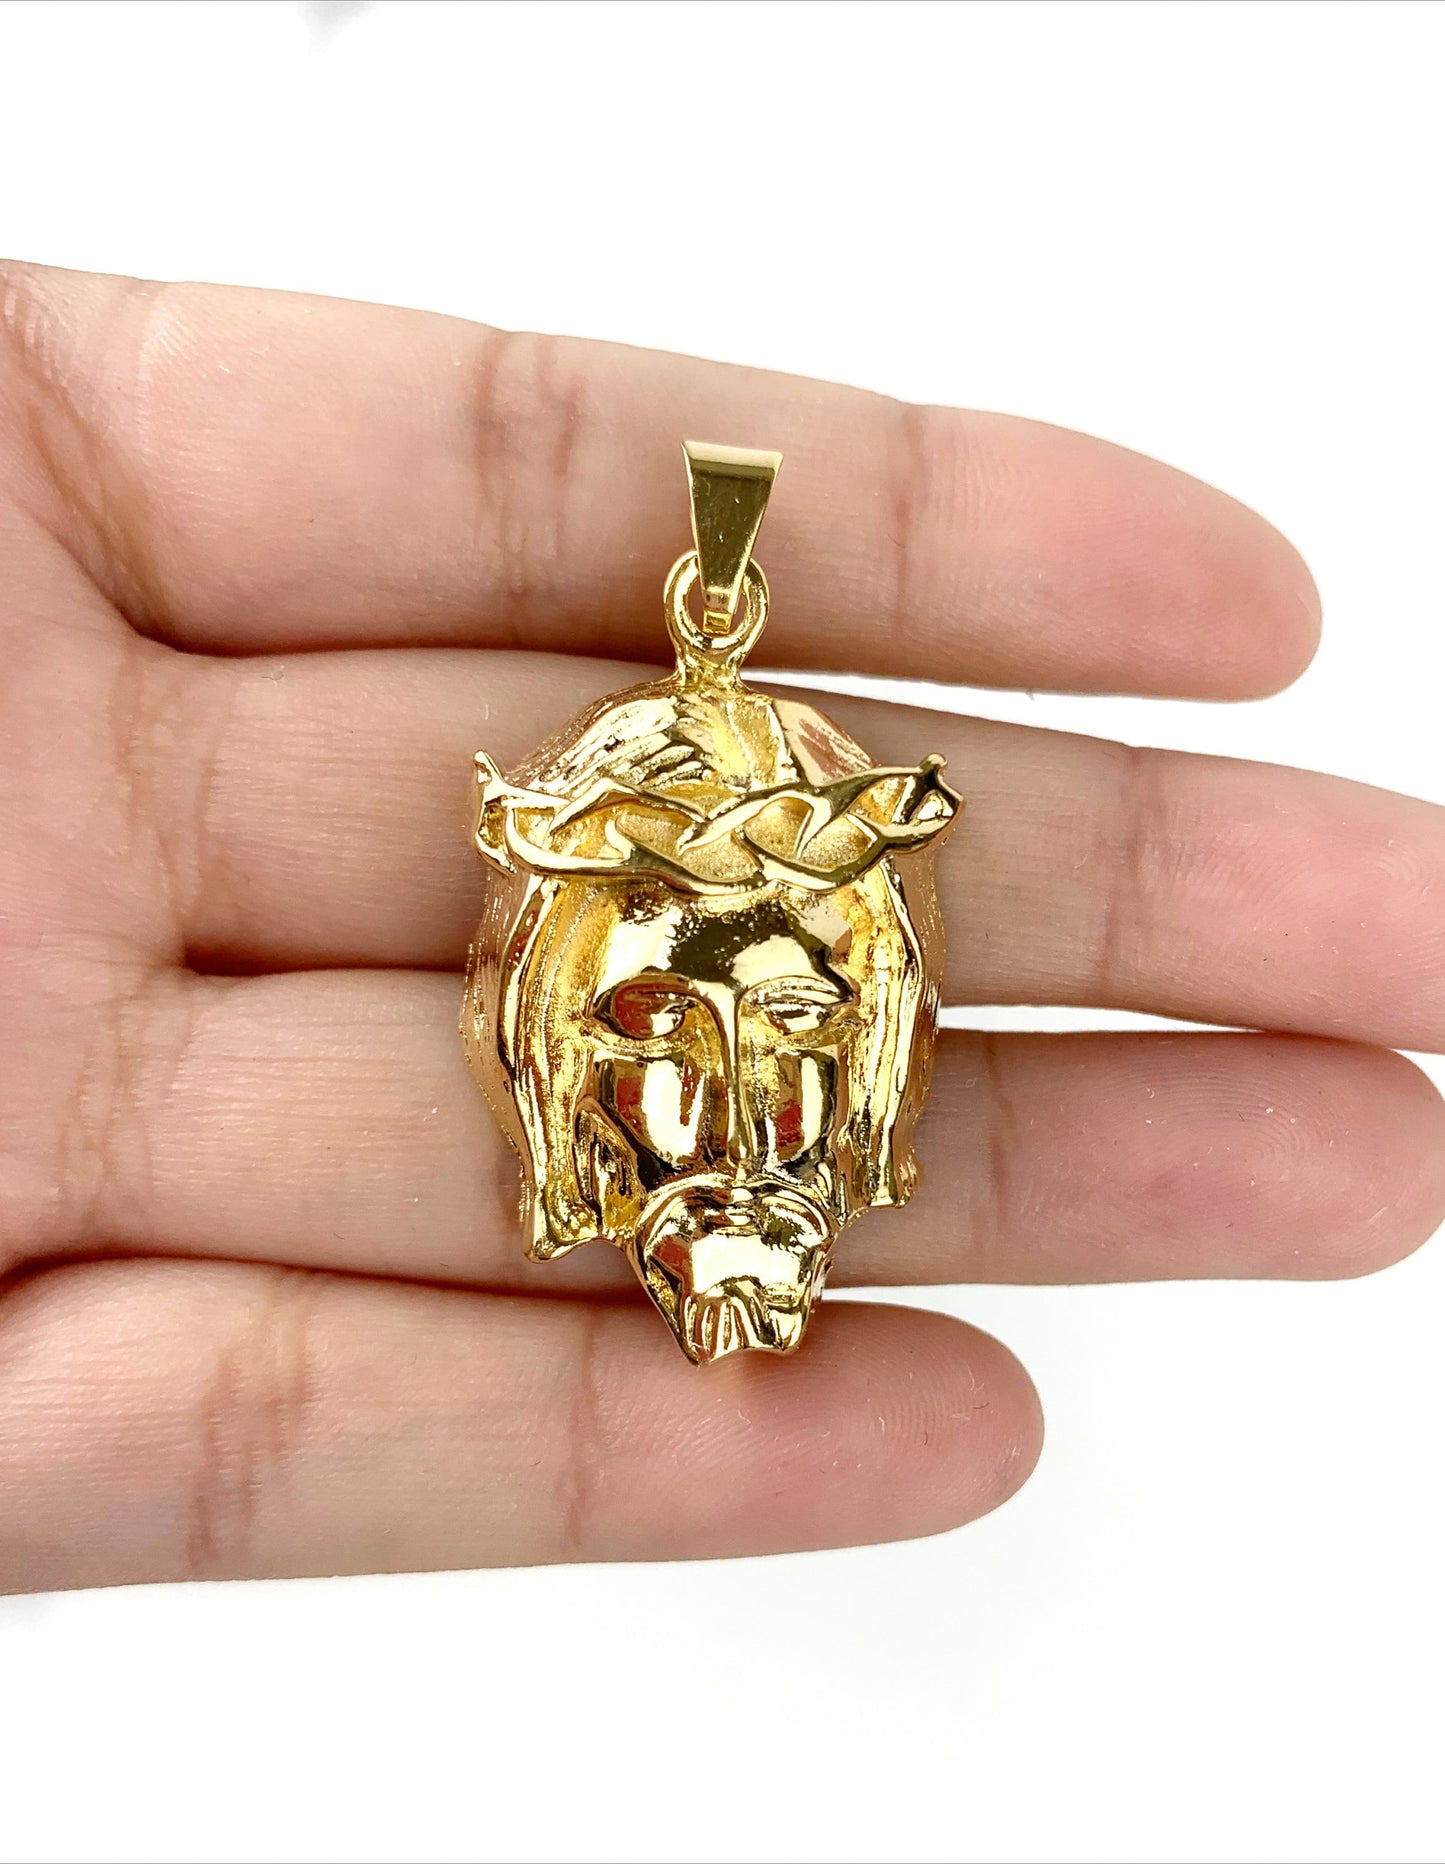 18k Gold Filled 3D Puffed Jesus Christ Face Pendants Charm, Religious Jewelry, Wholesale Jewelry Making Supplies